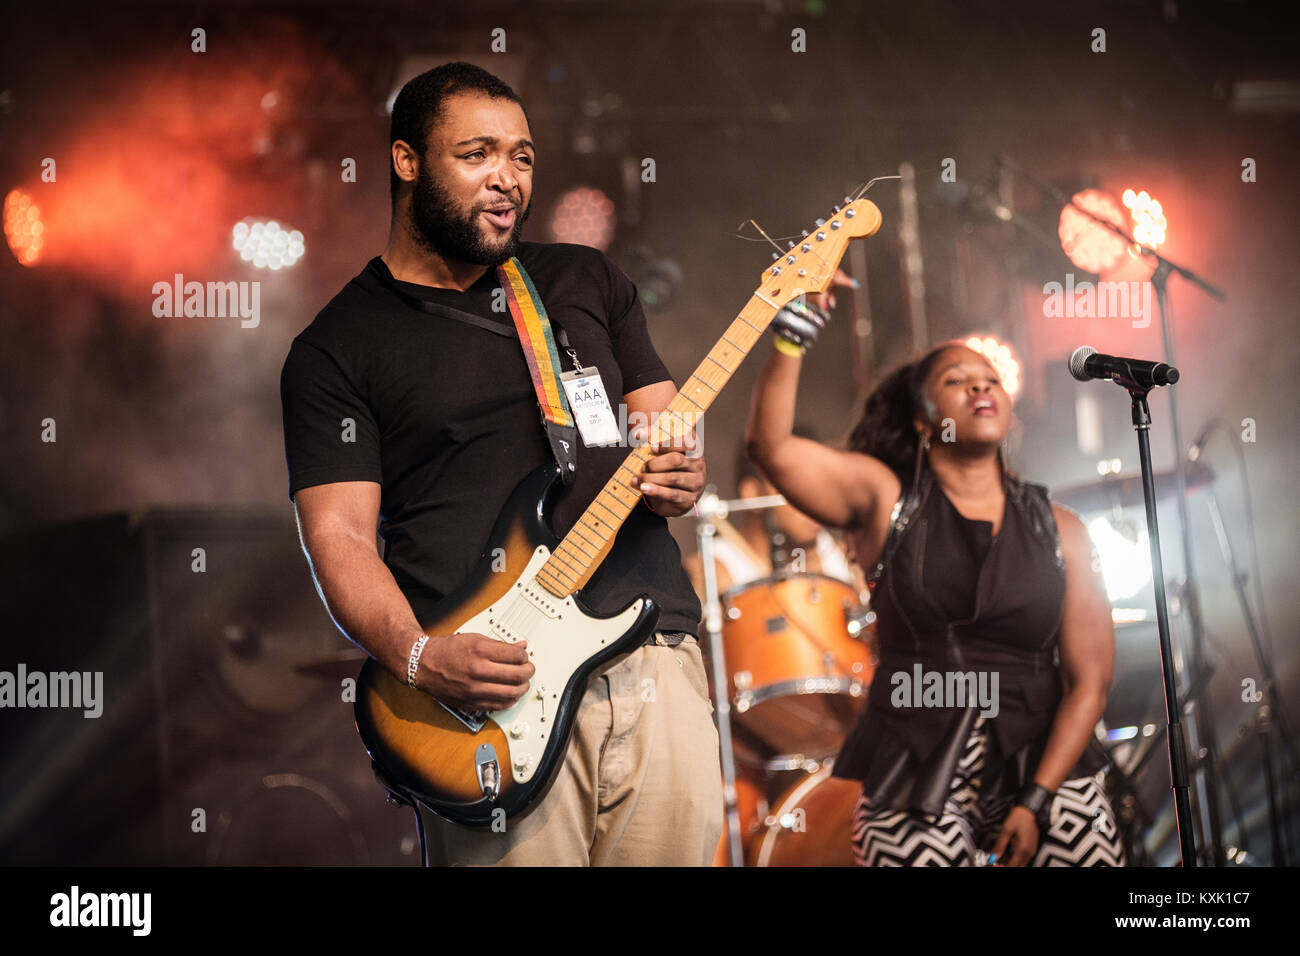 The American rap, soul and funk group The Coup originates from Oakland and is here pictured at a live concert at Vanguard Festival 2014 in Copenhagen. Here the band’s guitarist Grego Simmons is pictured live on stage. Denmark, 02/08 2014. Stock Photo